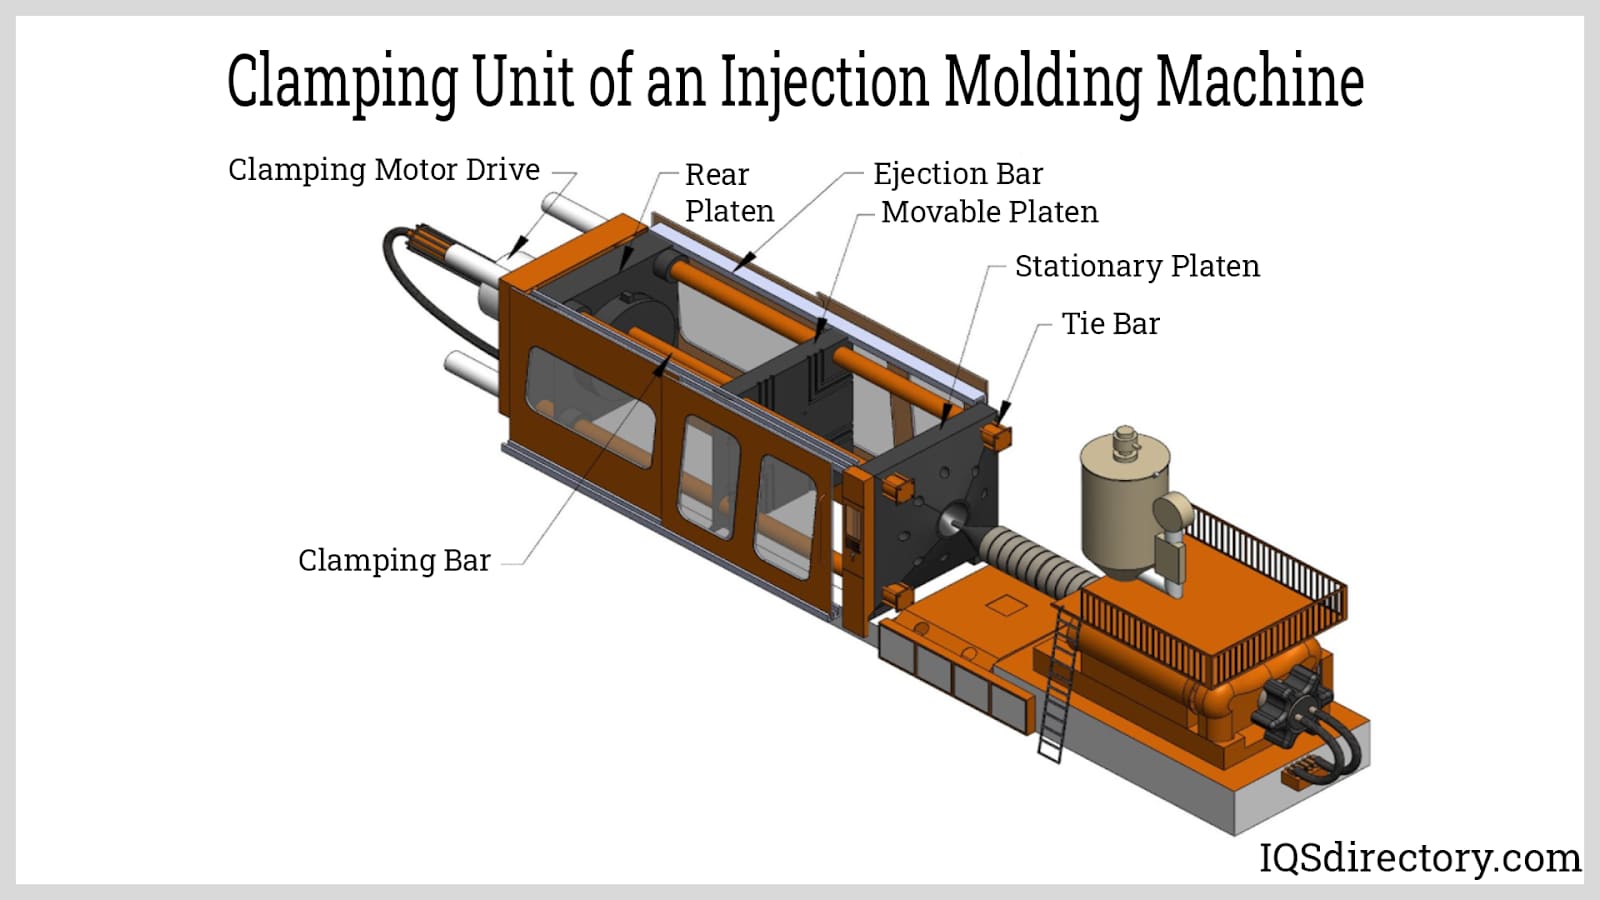 Clamping Unit of an Injection Molding Machine